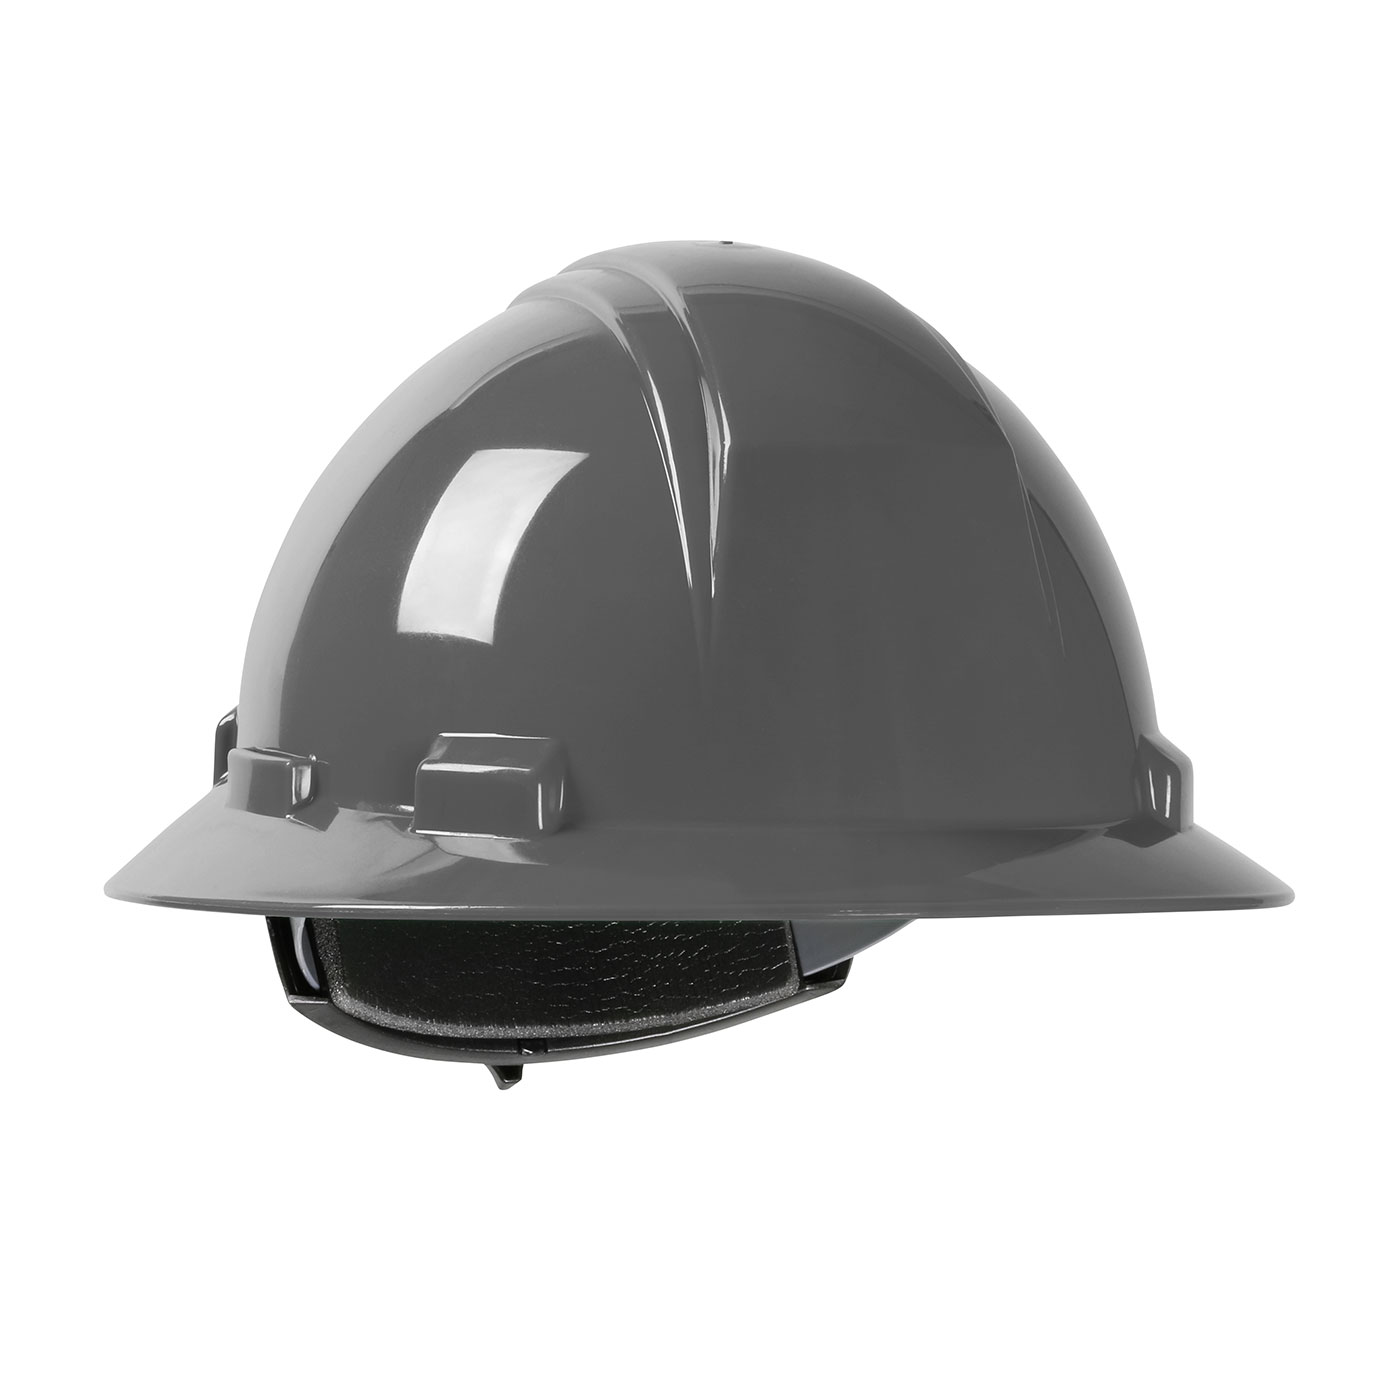 280-HP261R PIP® Dynamic Kilimanjaro™ Full Brim Hard Hat with HDPE Shell, 4-Point Textile Suspension and Wheel Ratchet Adjustment - Dark Gray